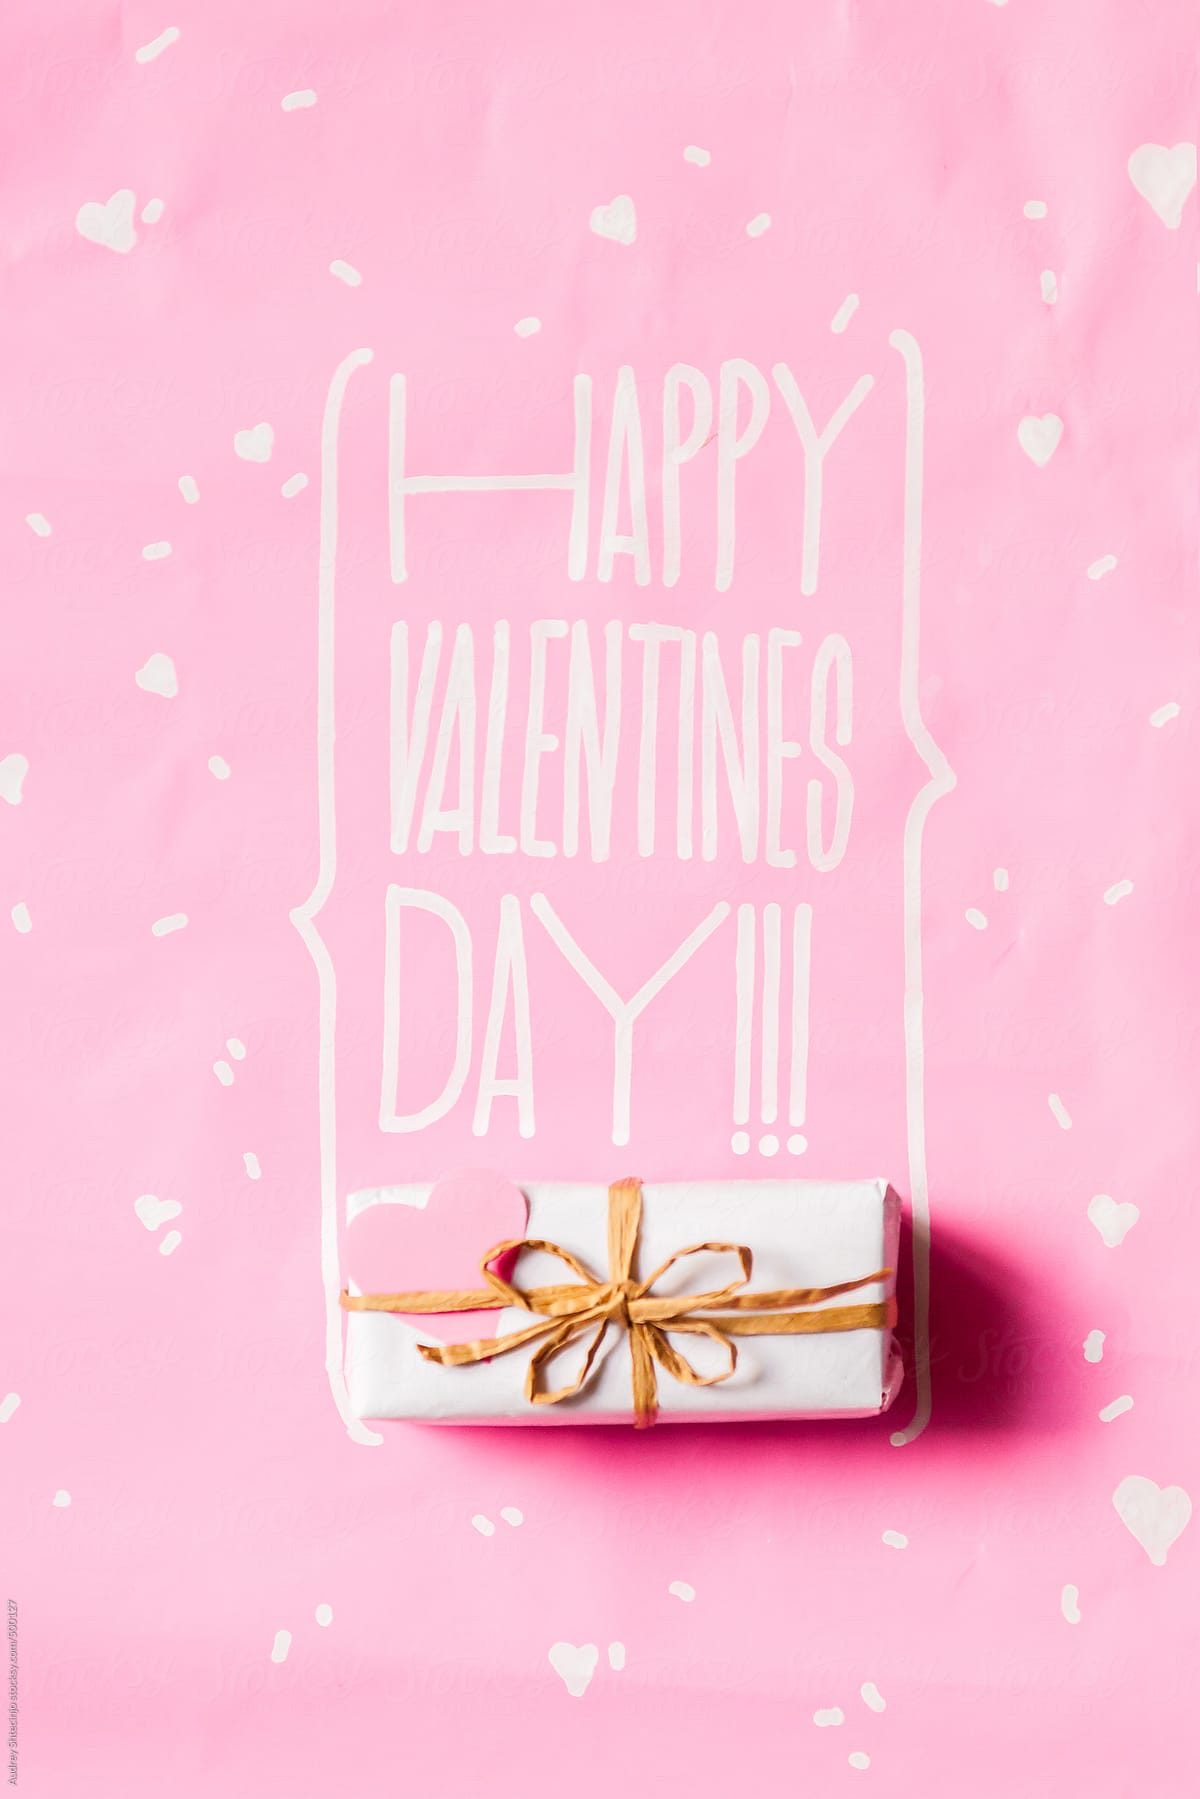 Happy Valentines Day text with present on pink background.